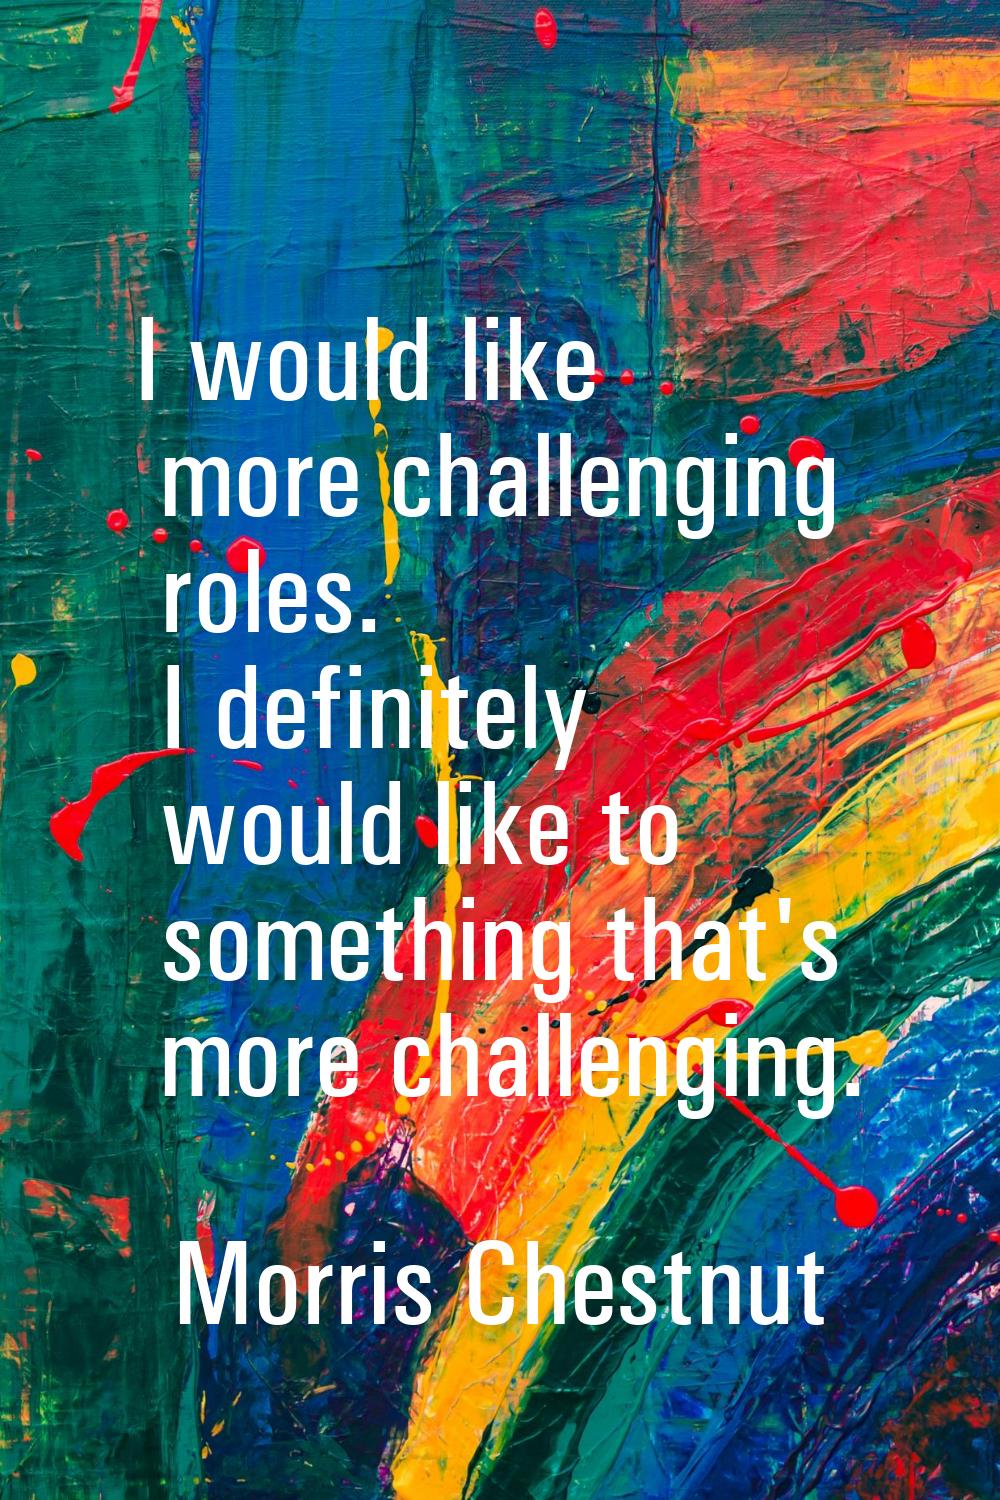 I would like more challenging roles. I definitely would like to something that's more challenging.